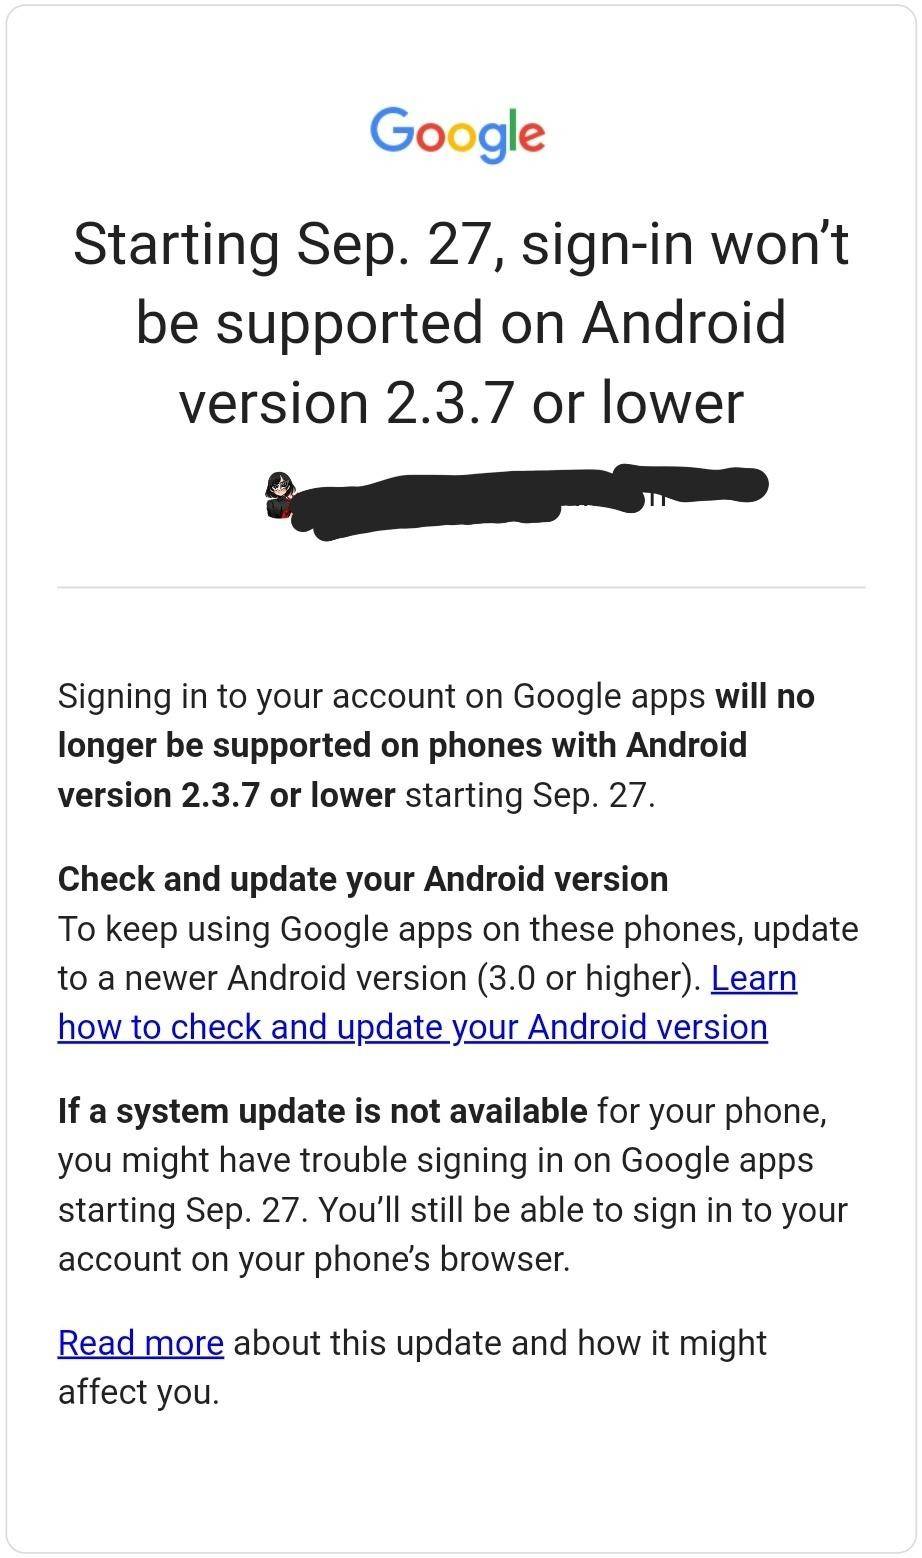 1627674686_google_sign-in_restricted_android_2.3.7